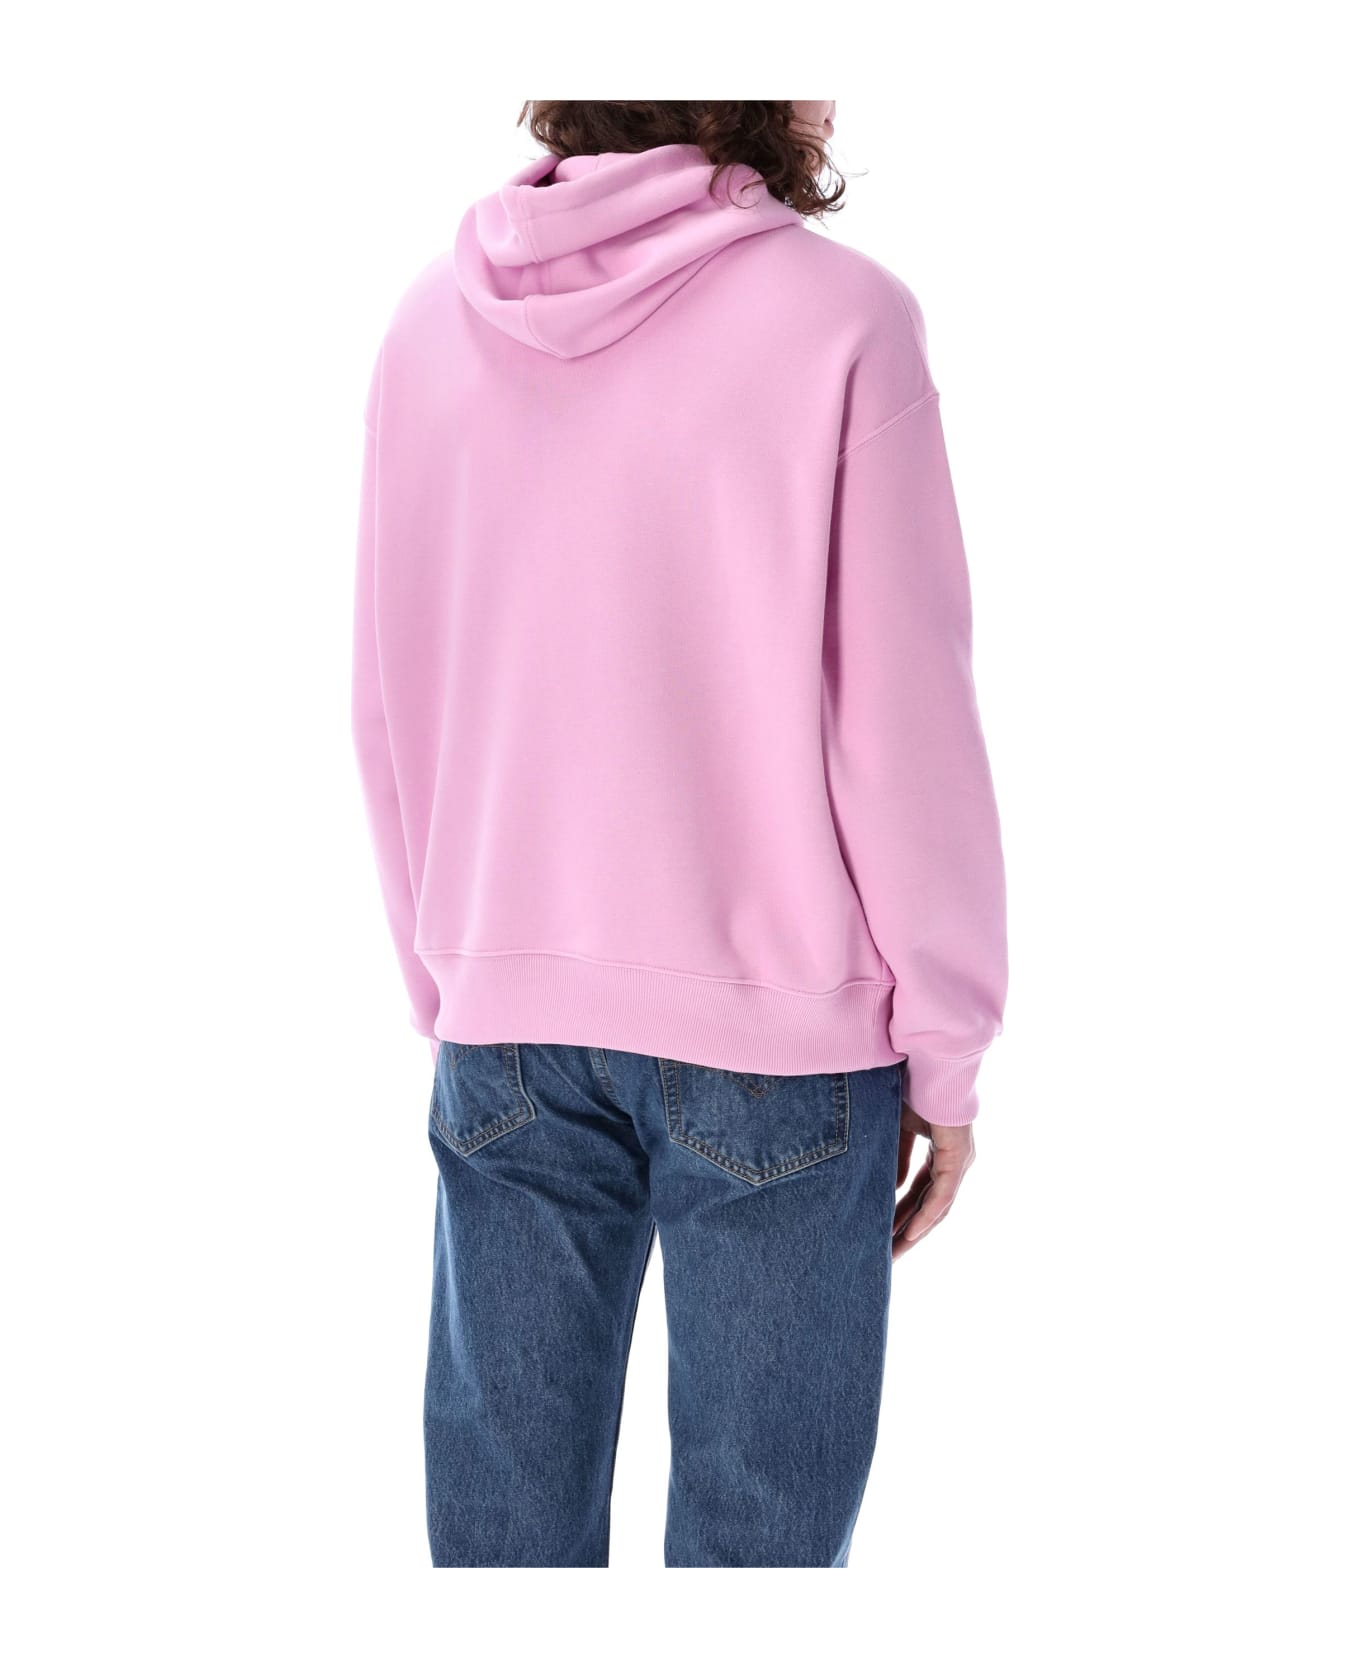 Lacoste Loose Fit Hoodie - BUBBLE PINK